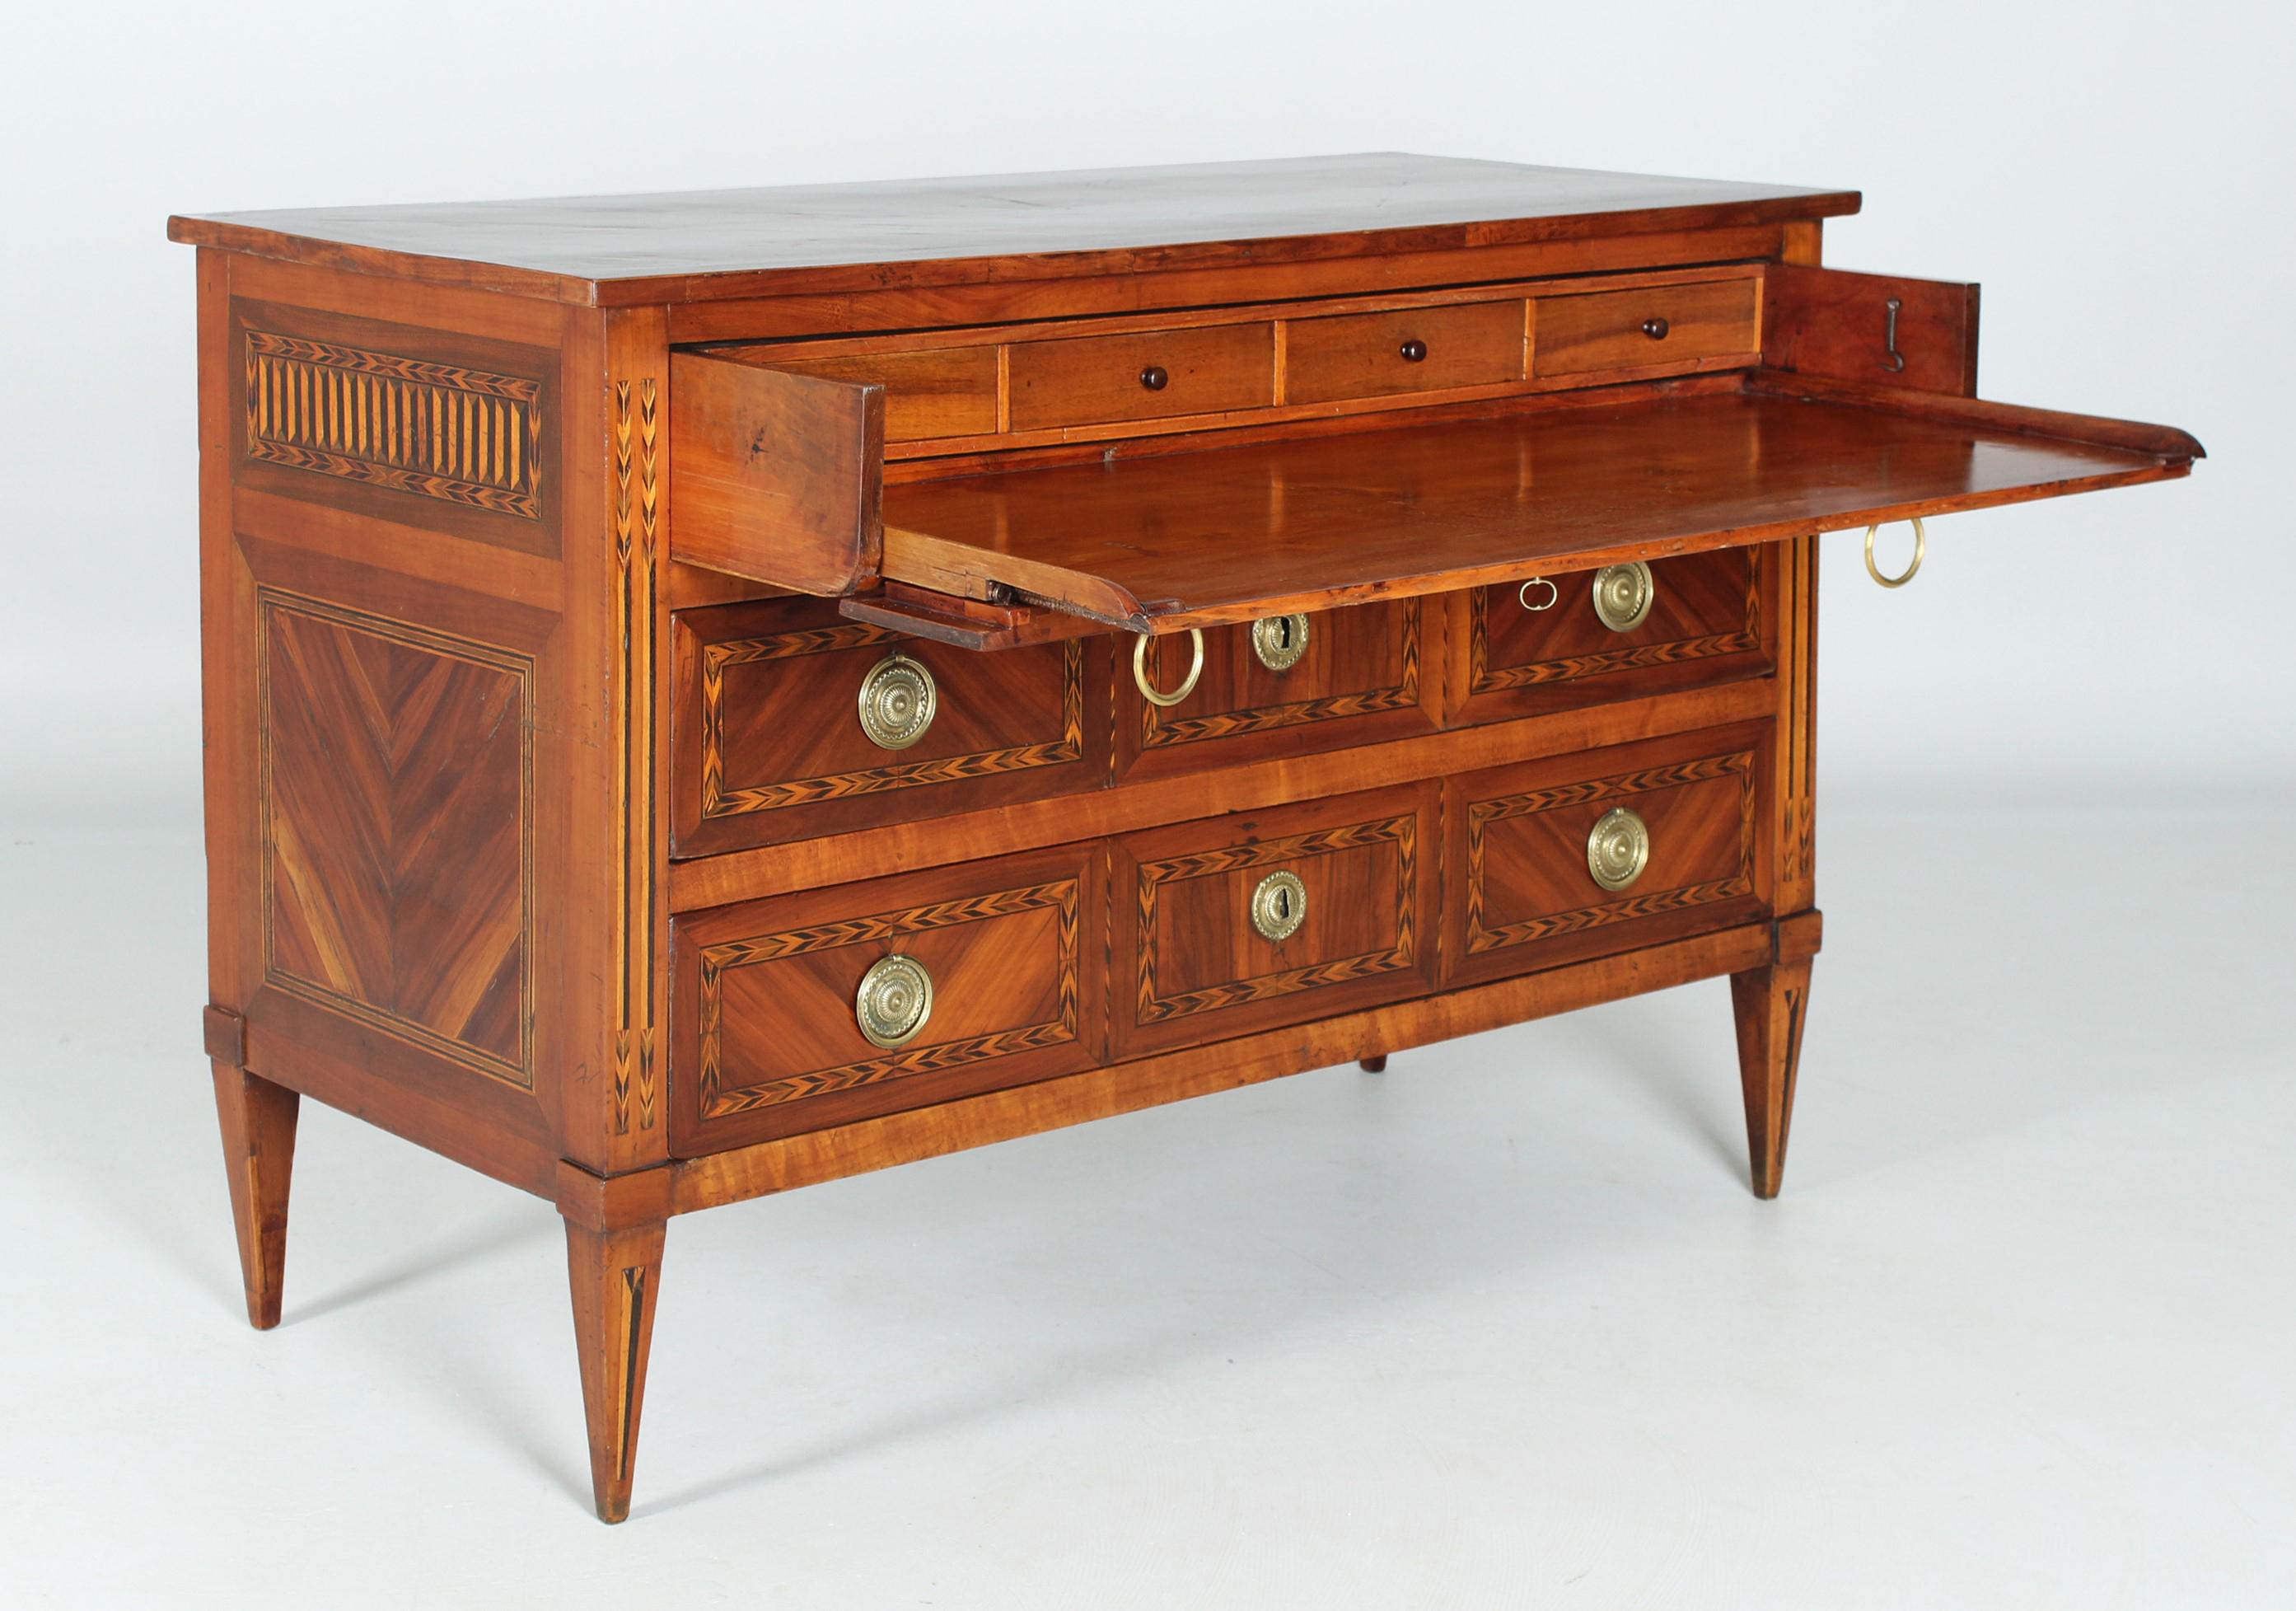 Fine Louis XVI chest of drawers with secretary compartment

Eastern France
Cherry, plum and others
Classicism around 1785

Dimensions: H x W x D: 90 x 130 x 59 cm

Description:
Three-tier piece of furniture standing on pointed legs with impressive